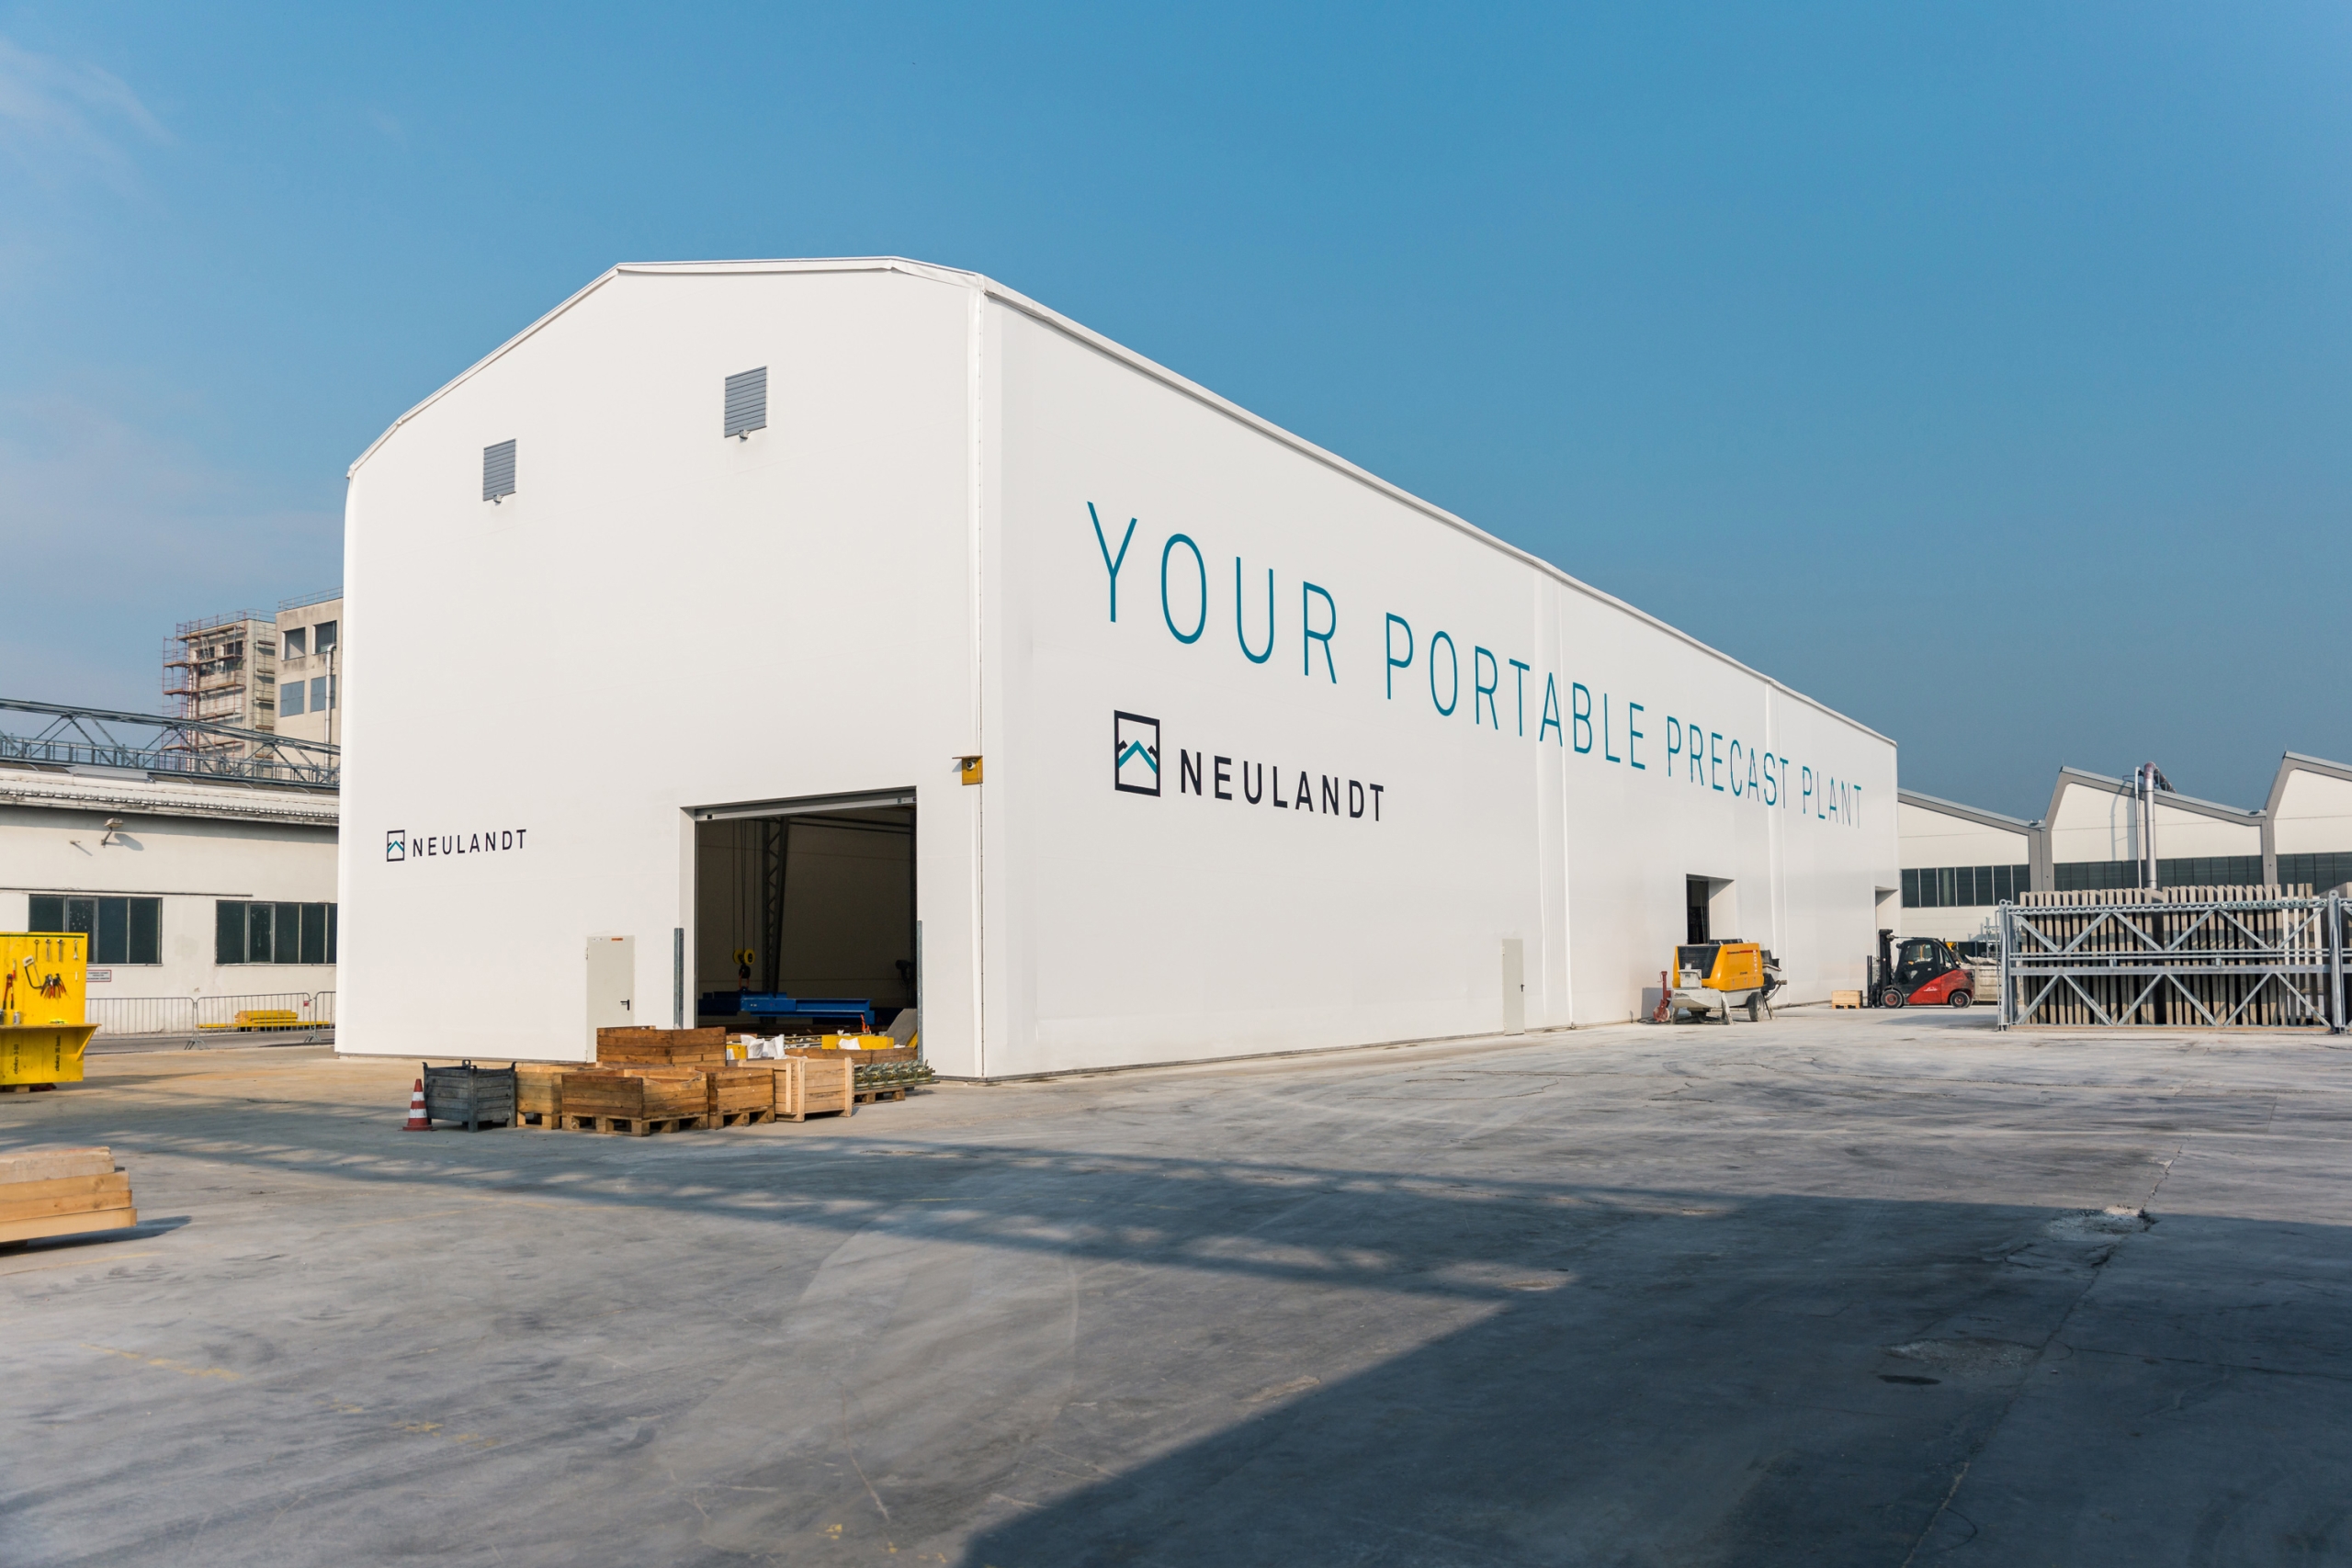 NEULANDT portable precast plant from the outside